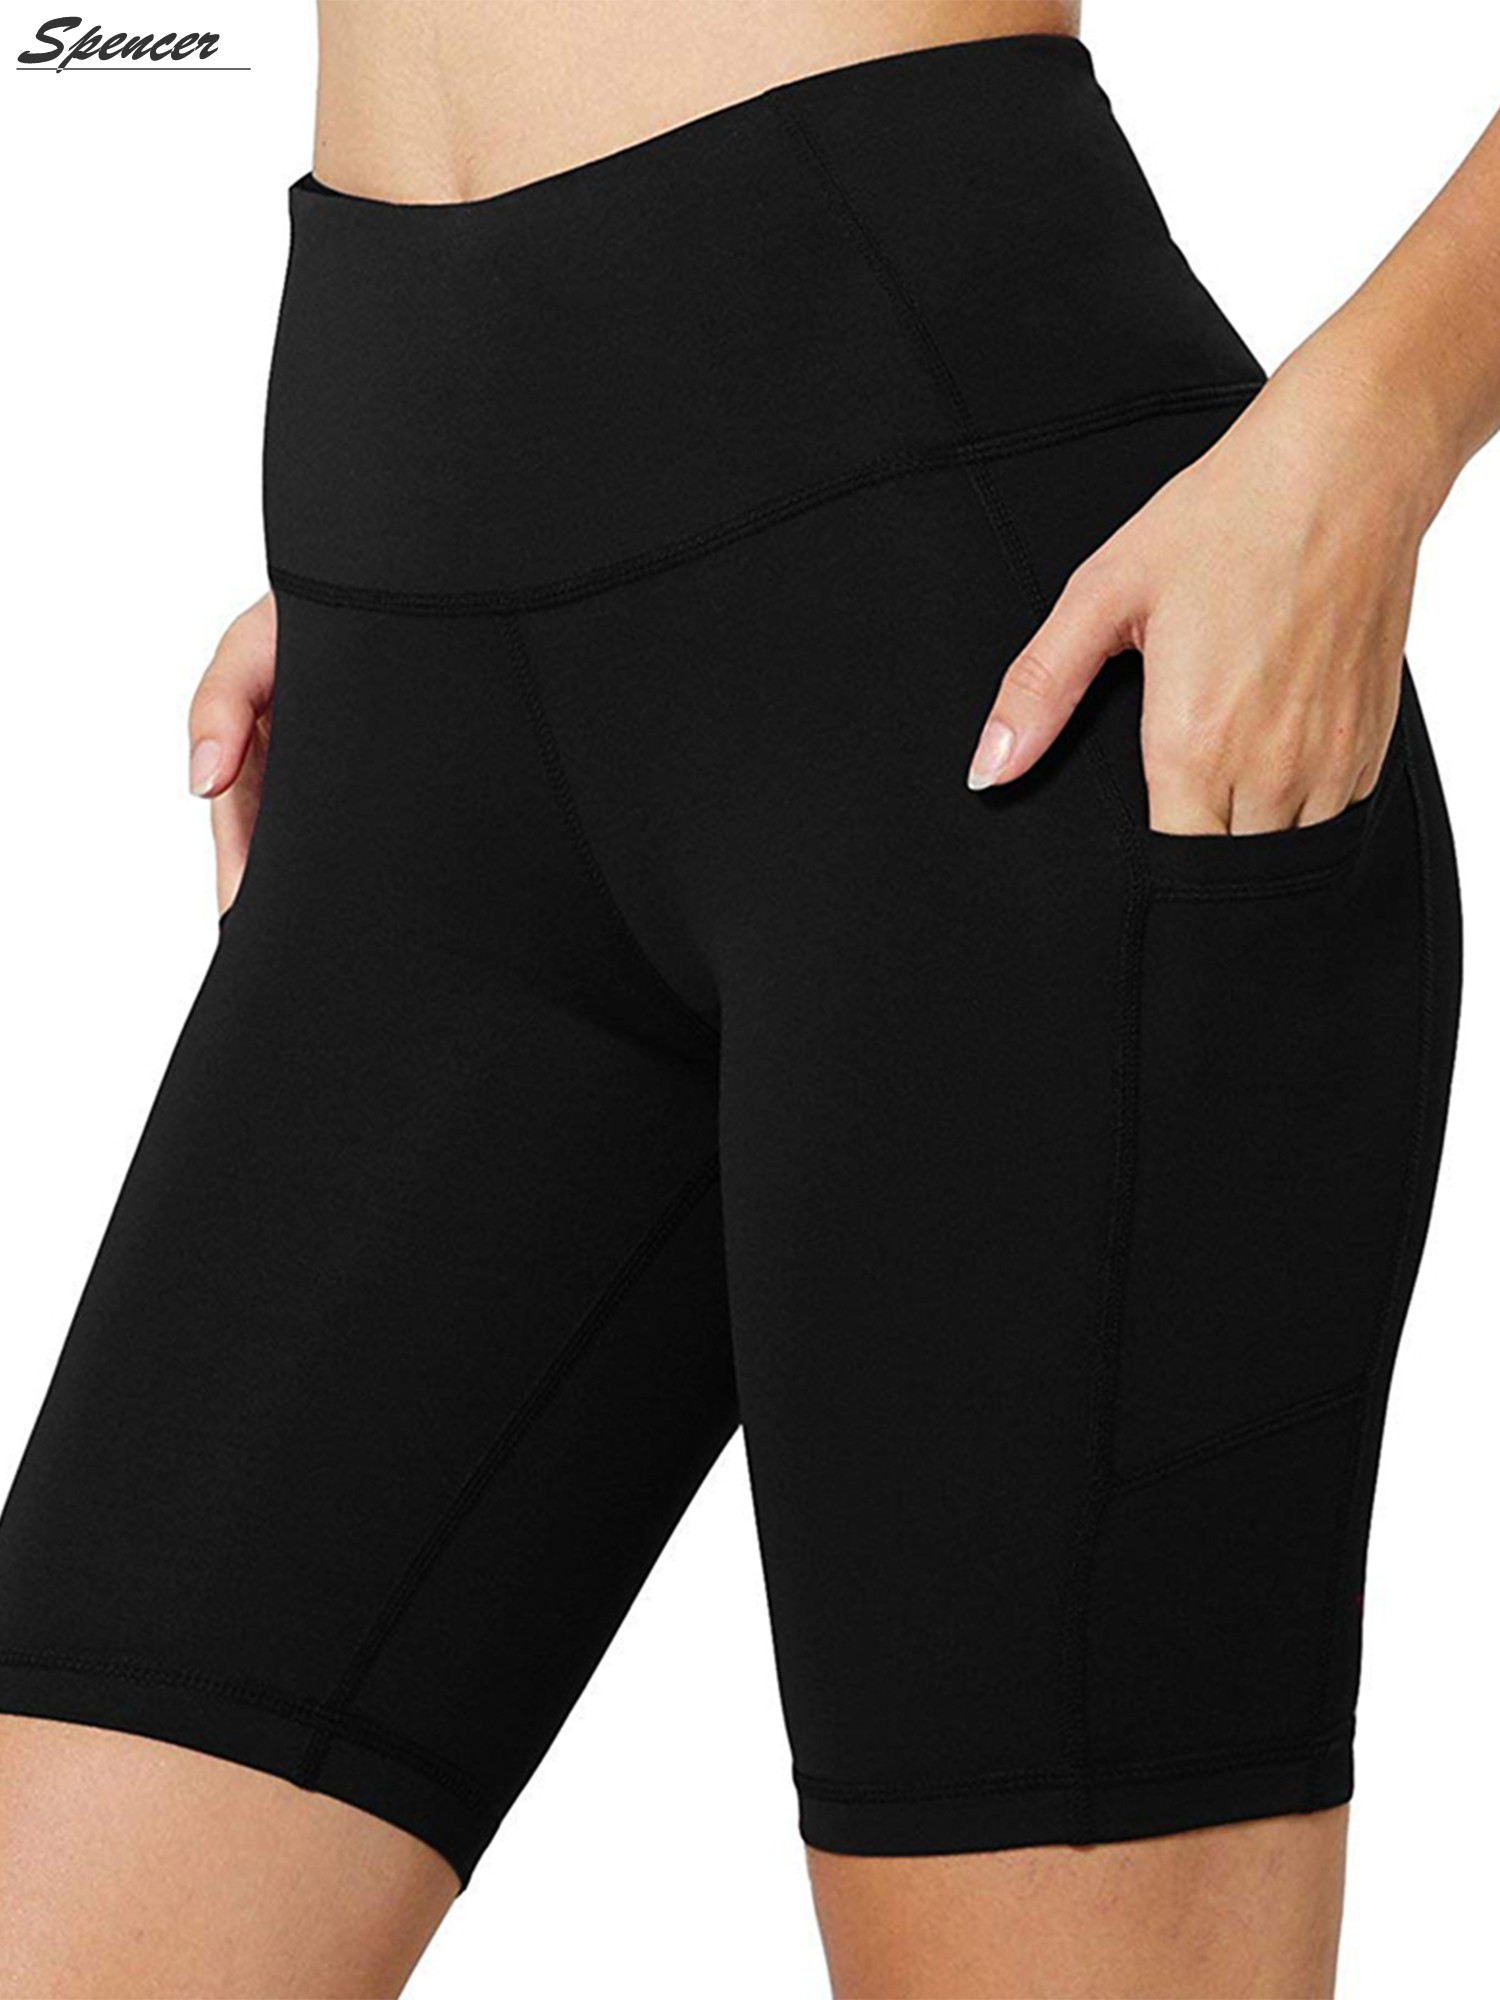 Spencer Womens High Waist Yoga Shorts with Side Pockets Tummy Control Workout 4 Way Stretch Yoga Leggings "M, Black" - image 1 of 9